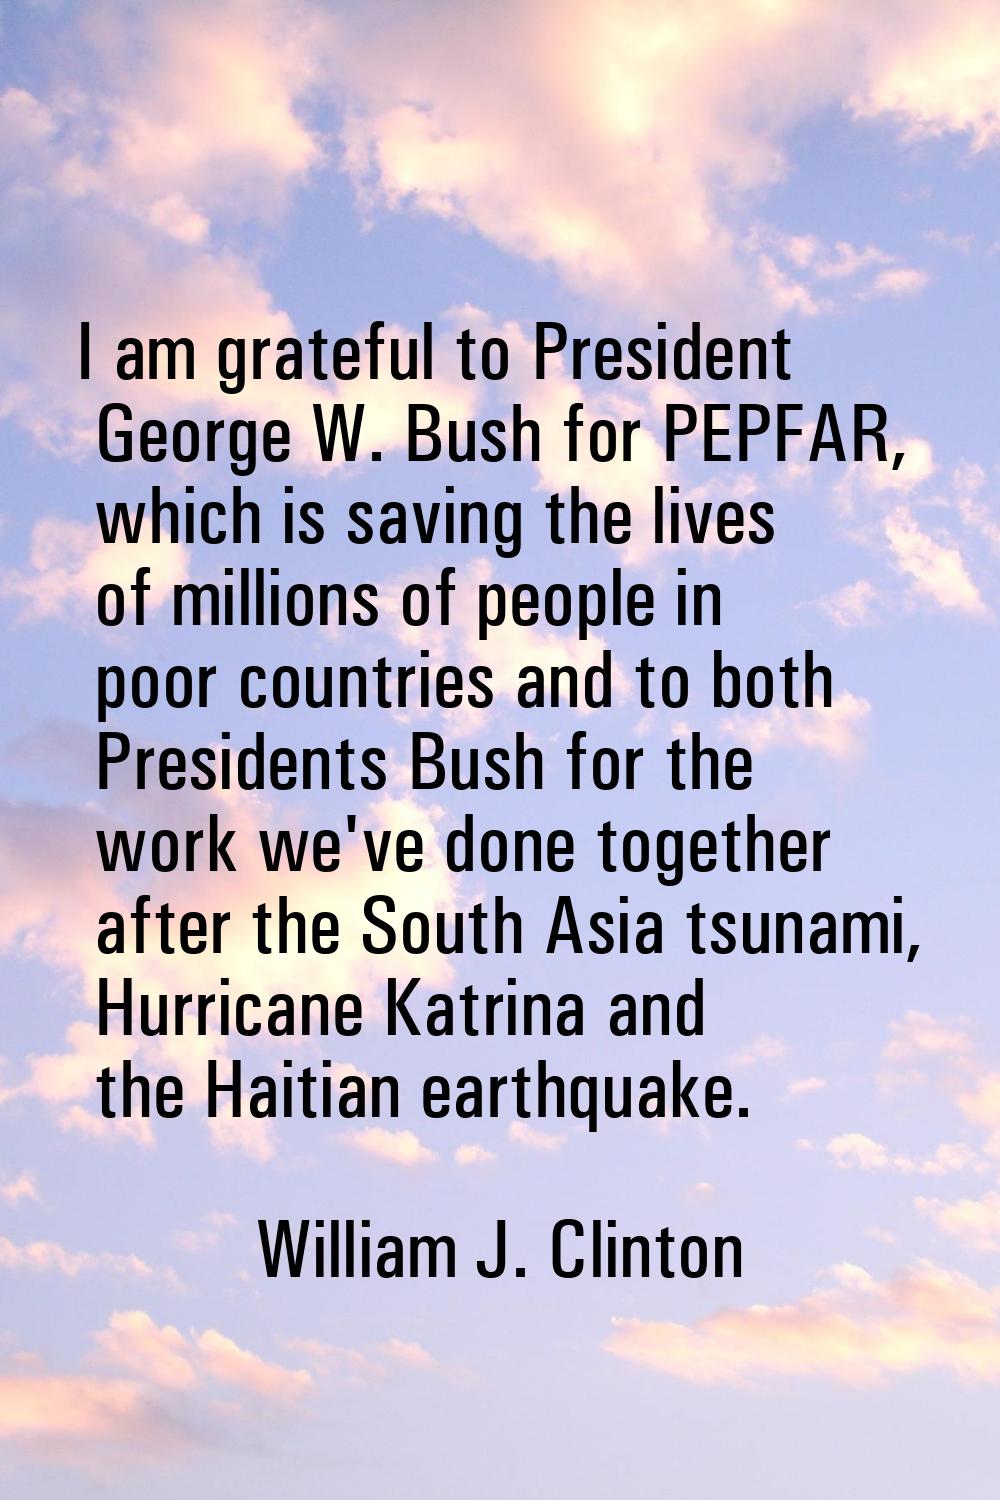 I am grateful to President George W. Bush for PEPFAR, which is saving the lives of millions of peop